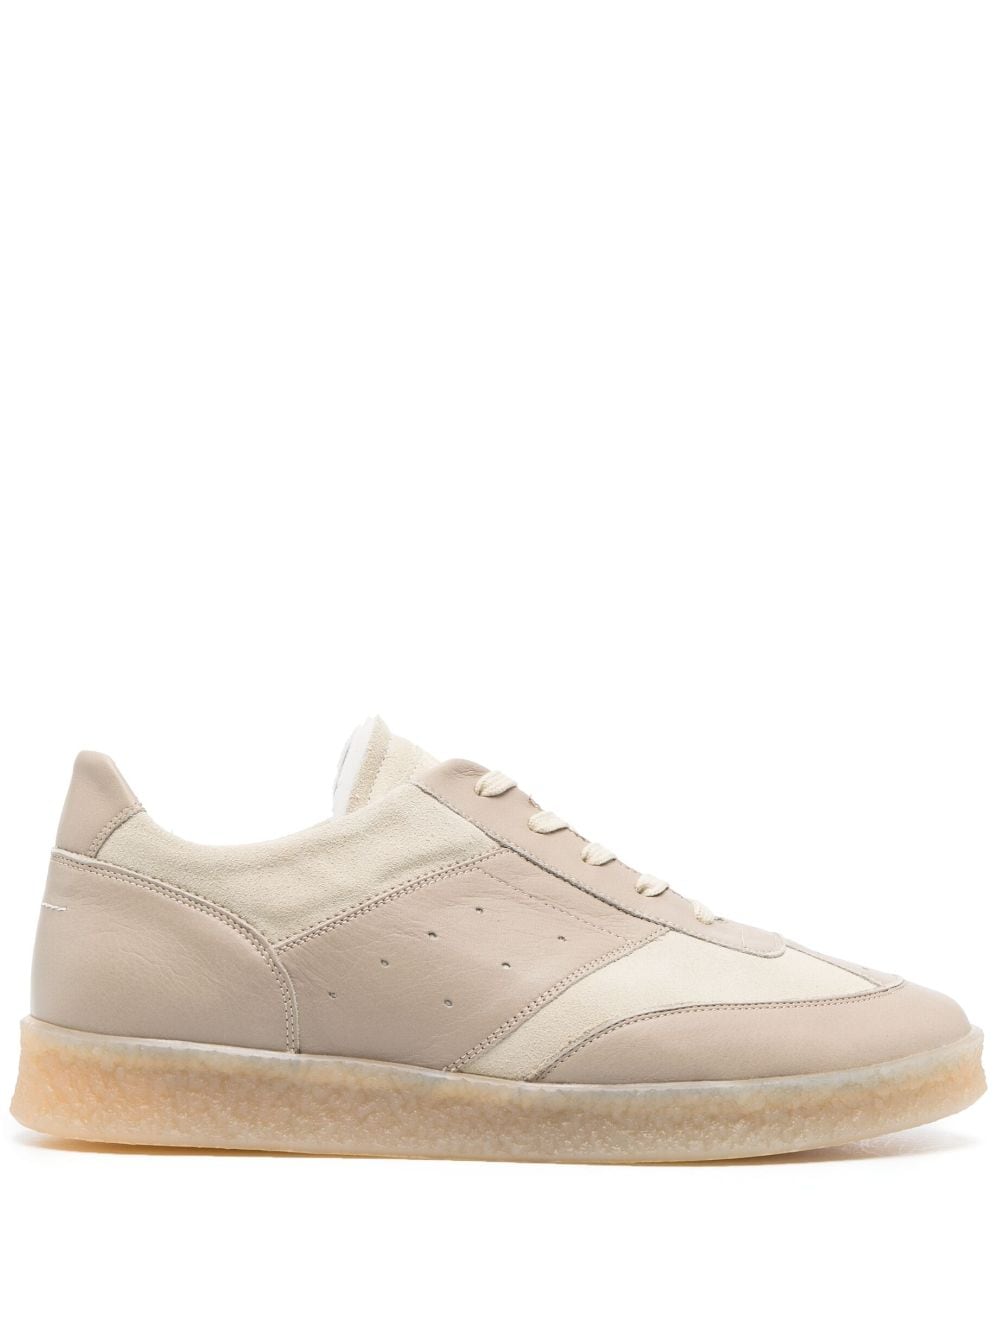 MM6 Maison Margiela Panelled lace-up Sneakers - Farfetch